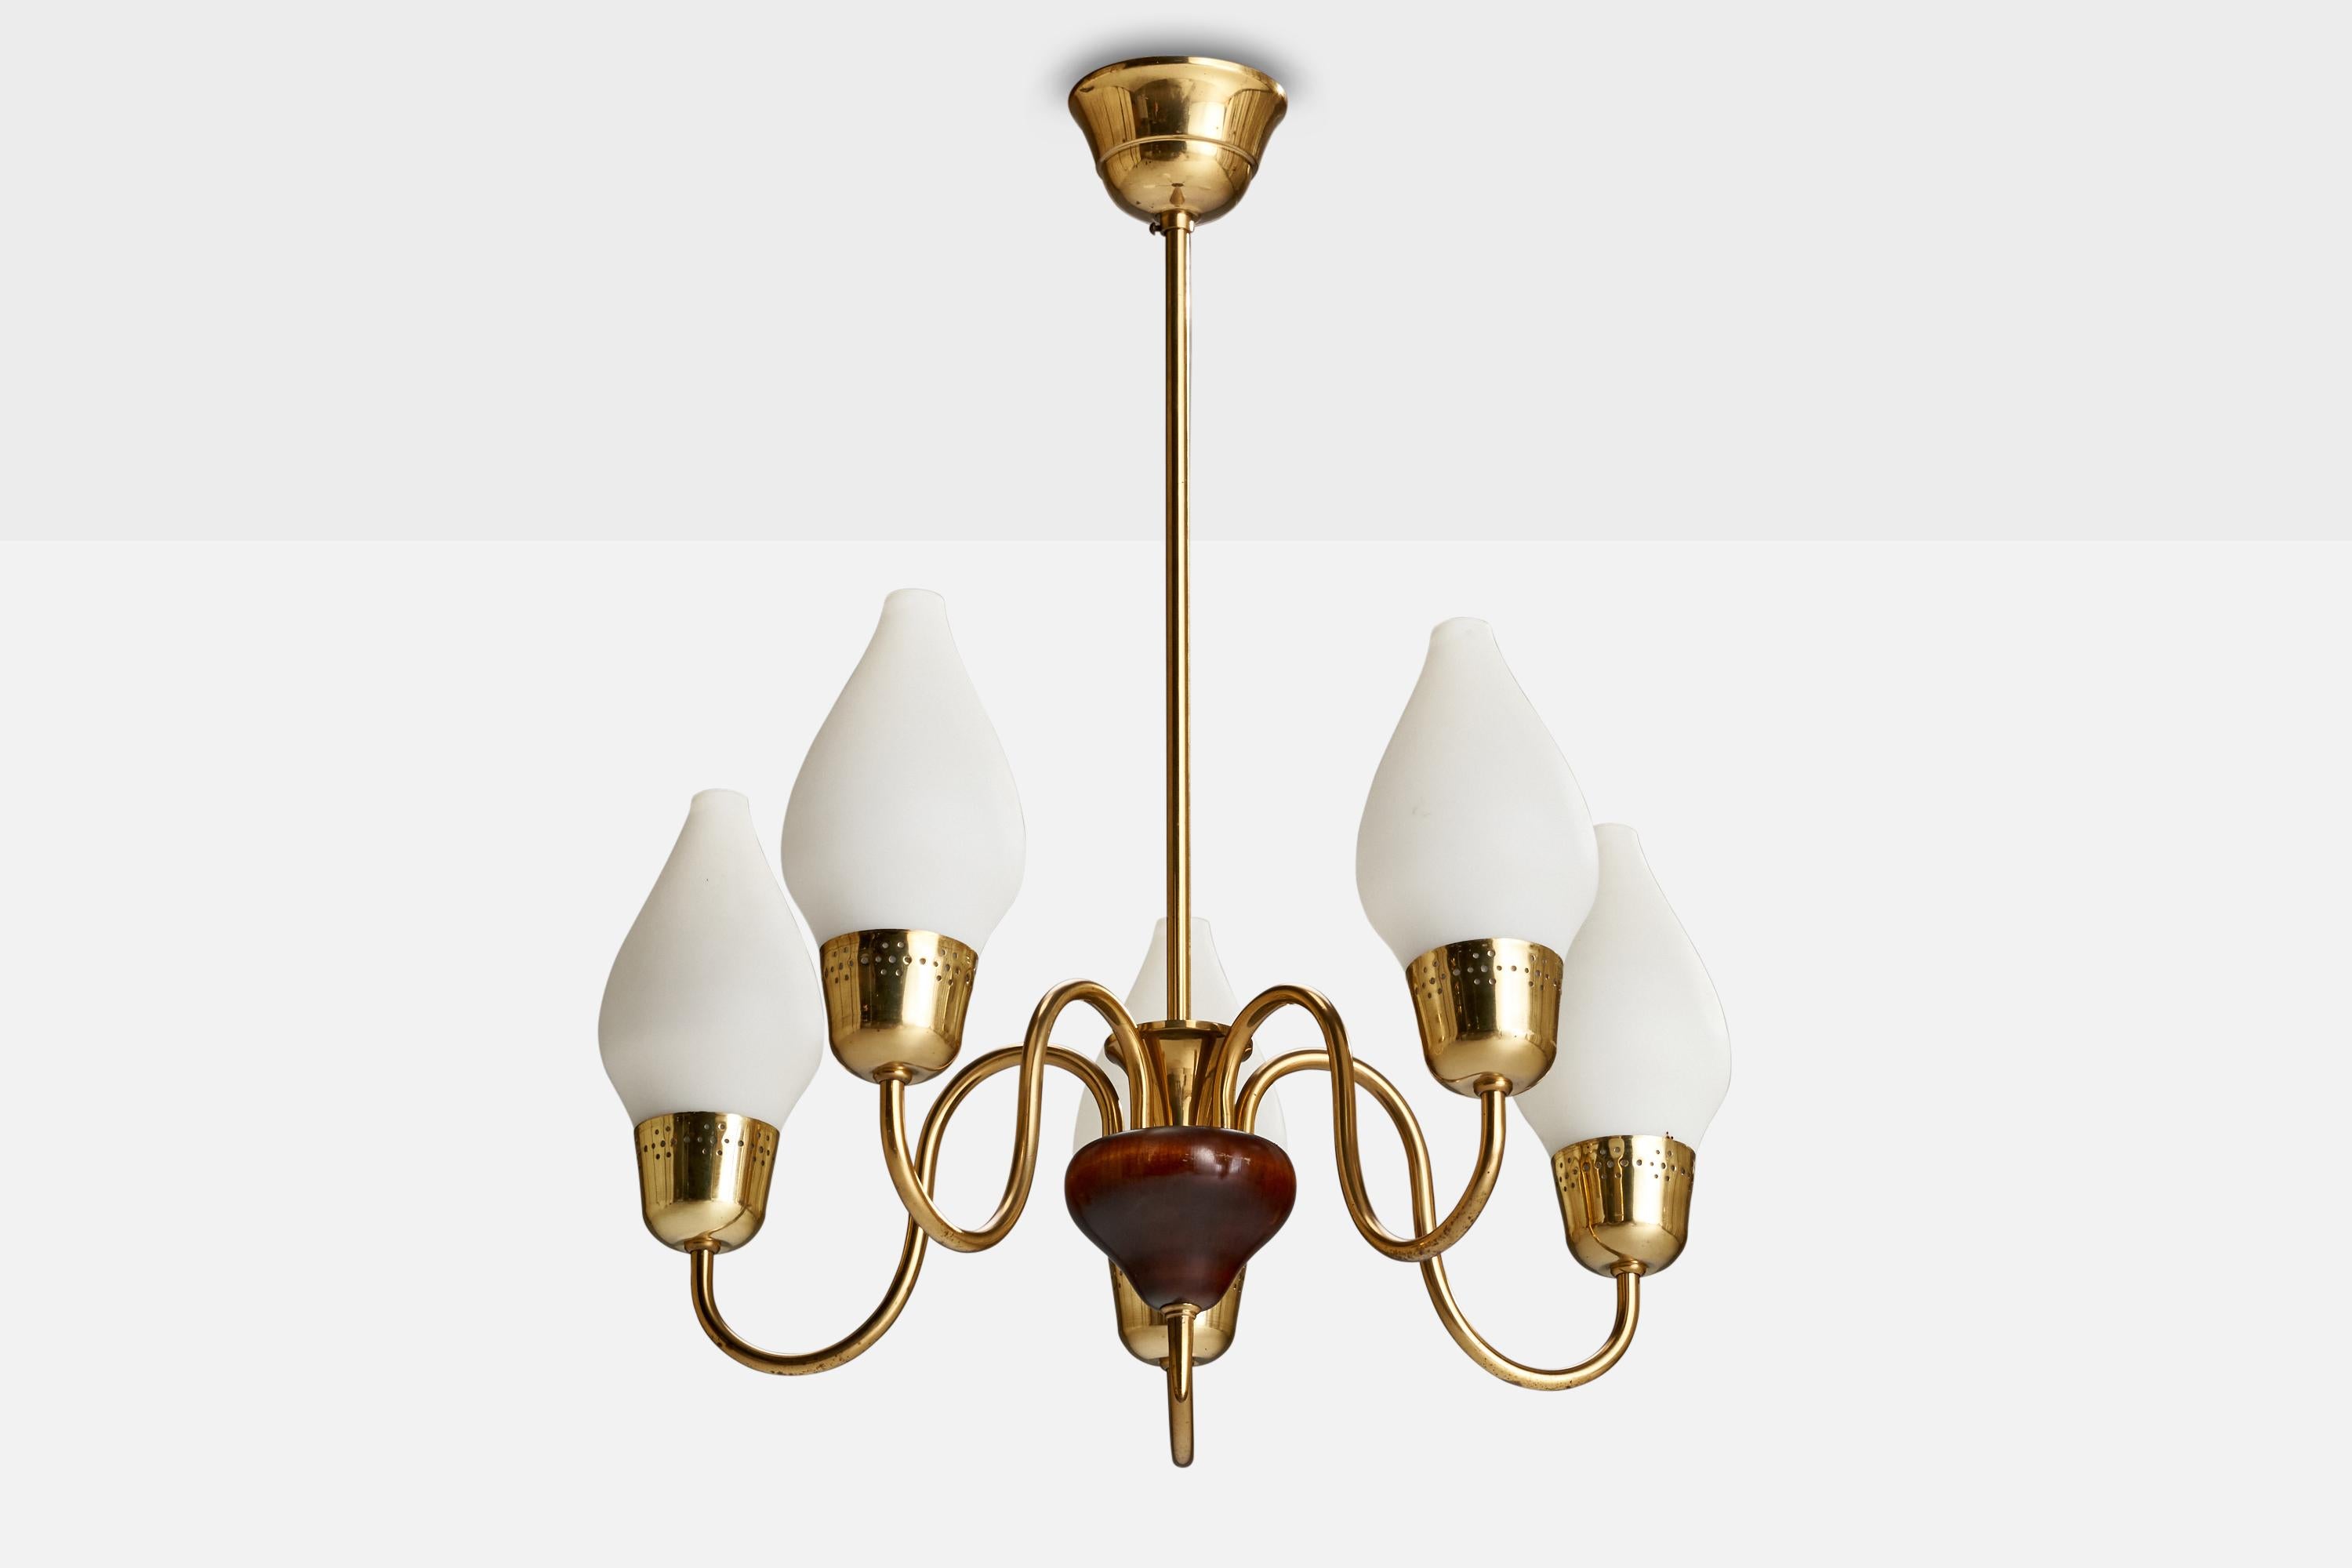 A brass, stained wood and opaline glass chandelier designed and produced in Sweden, c. 1940s.

Dimensions of canopy (inches): 2.16” H x 3.70” Diameter
Socket takes standard E-14 bulbs. 5 socket.There is no maximum wattage stated on the fixture. All